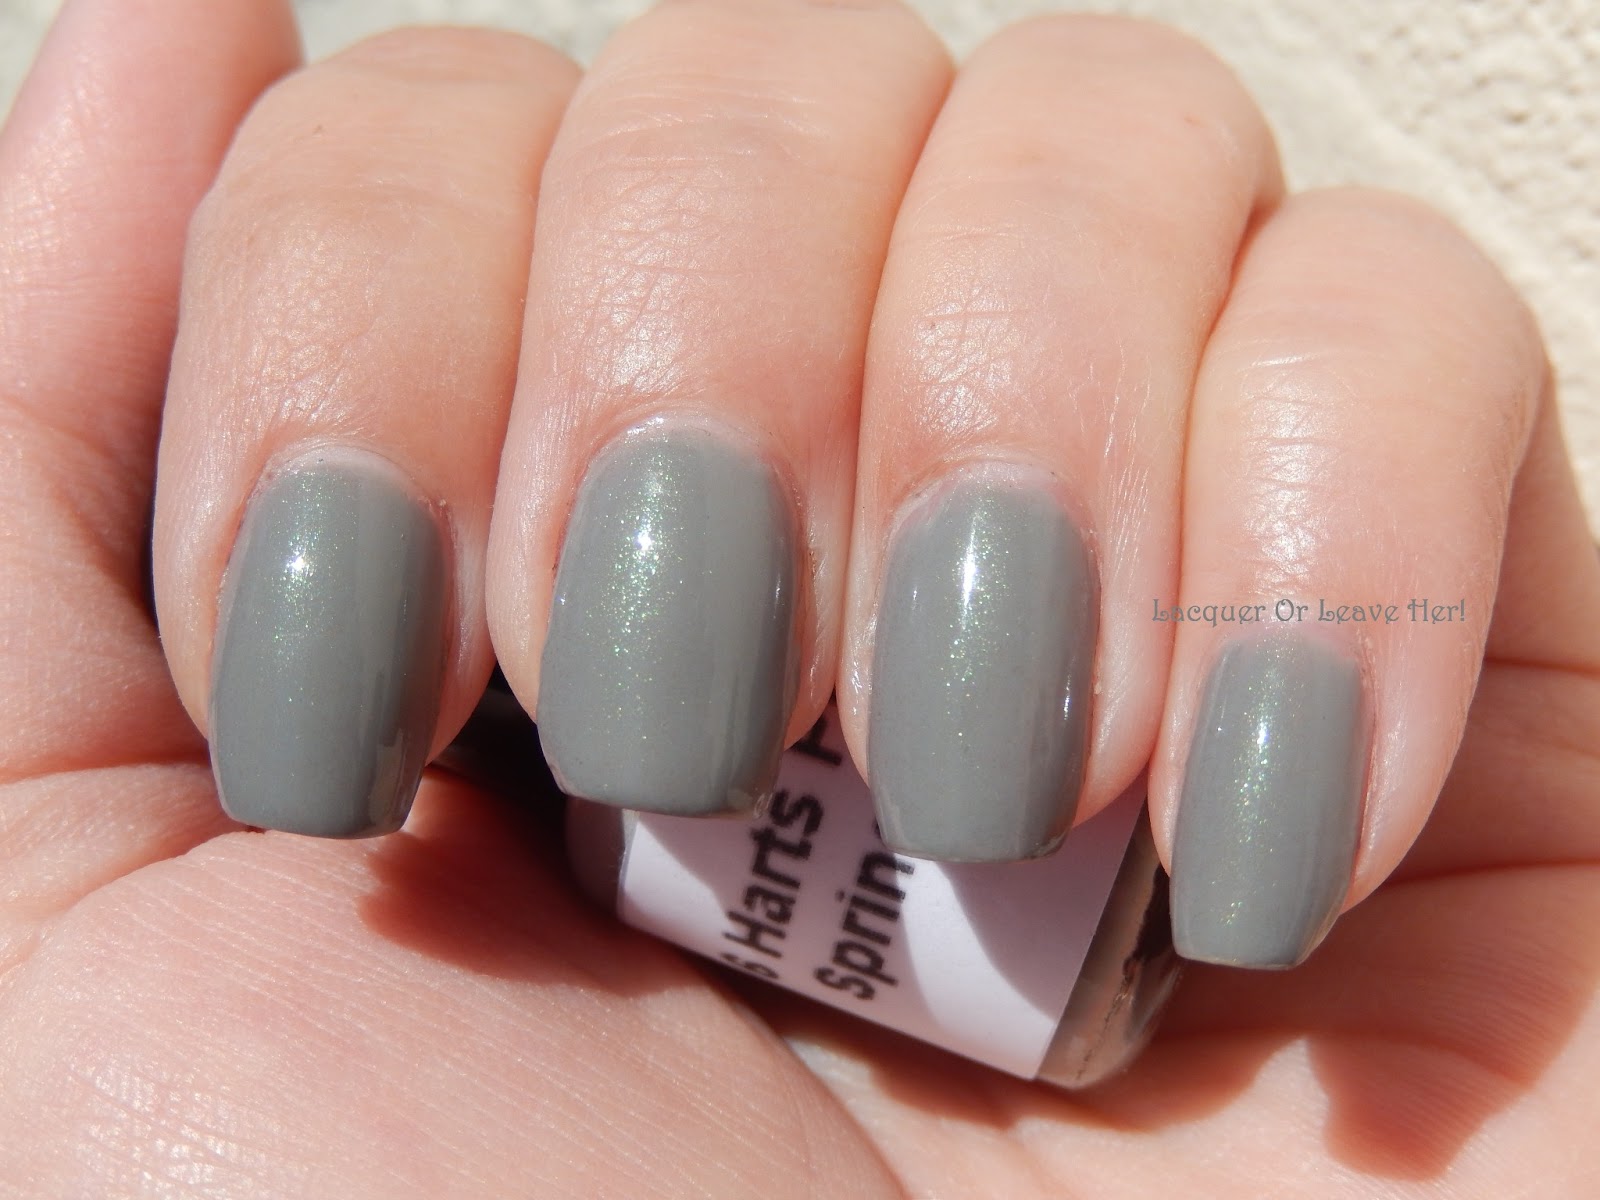 Lacquer or Leave Her!: Review: 6 Harts Polish